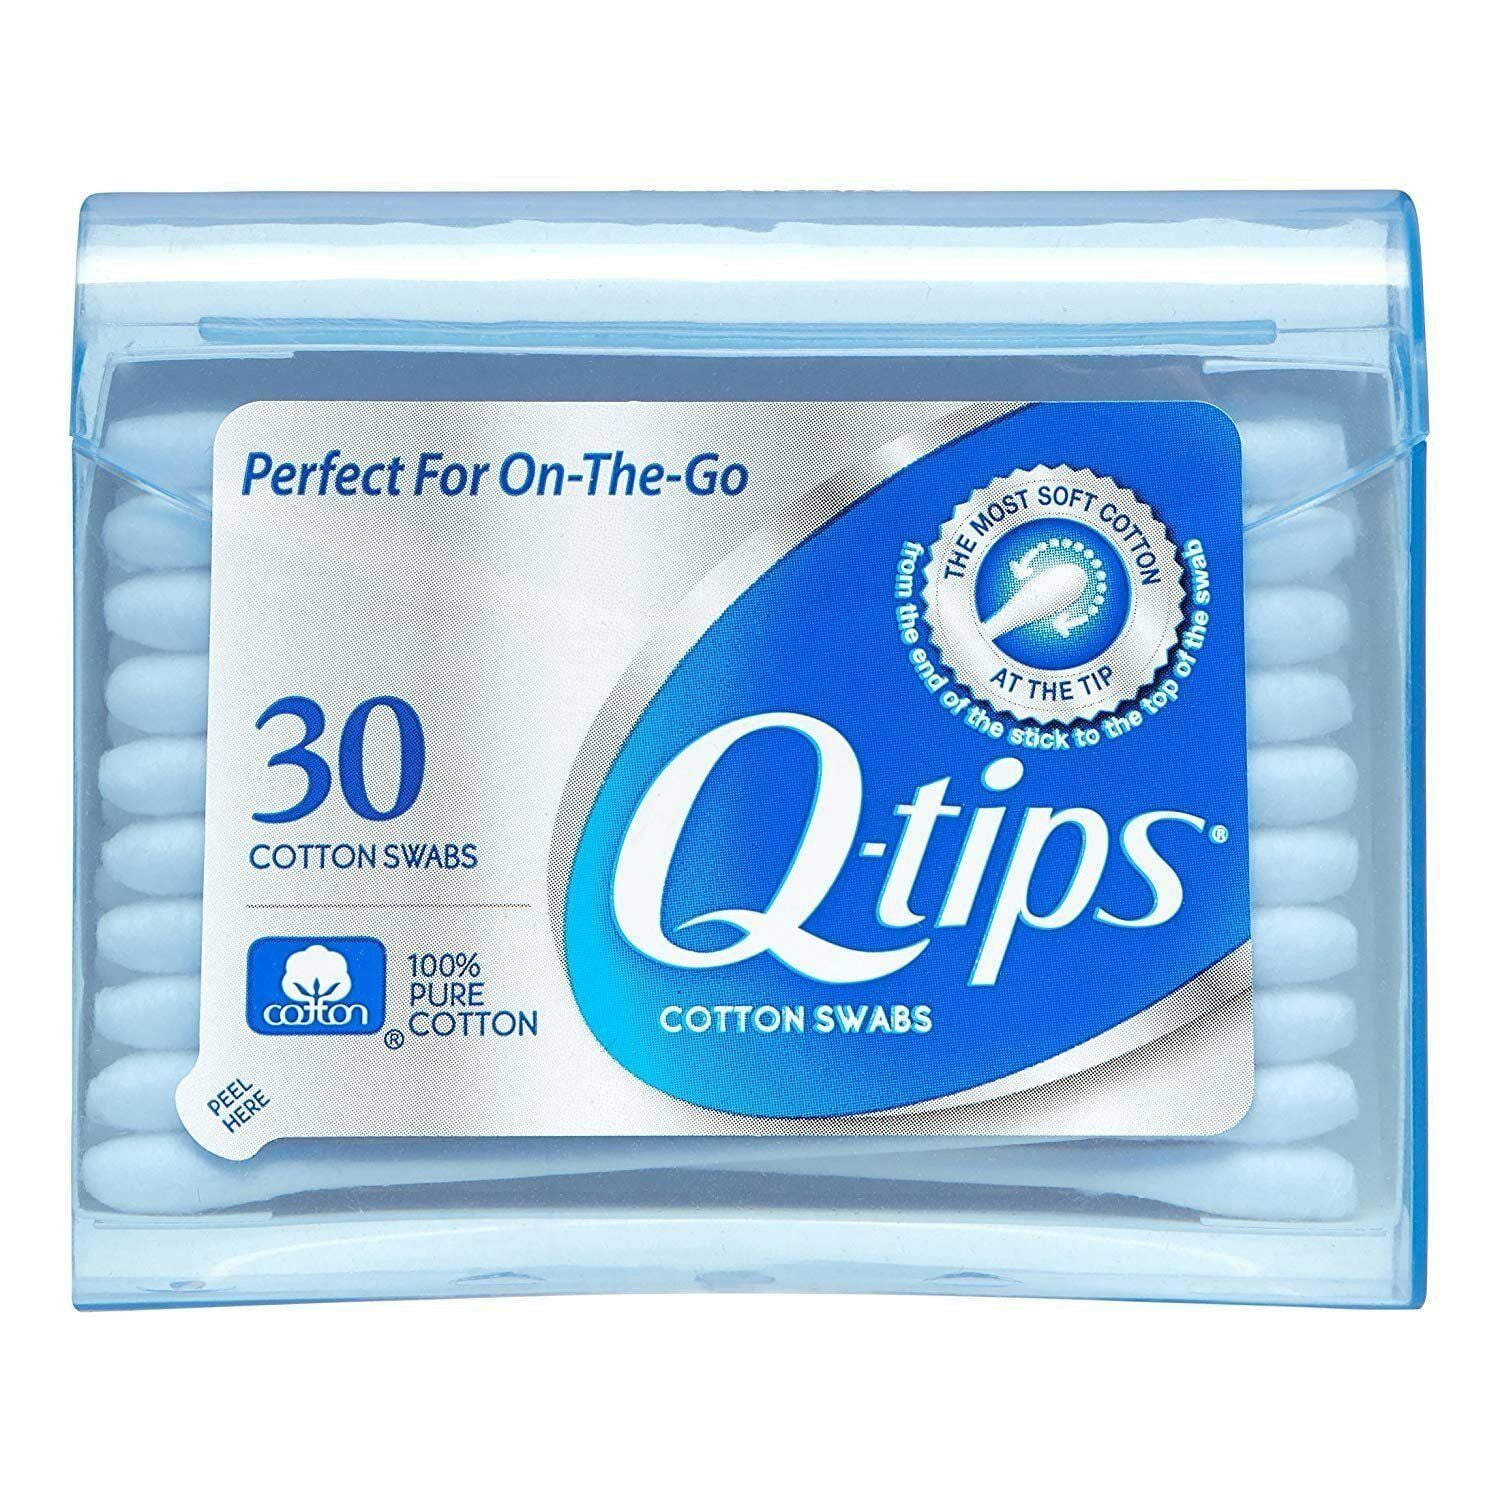 Q-tips® Cotton Swabs Travel Size Purse Pack, 30 ct - Harris Teeter